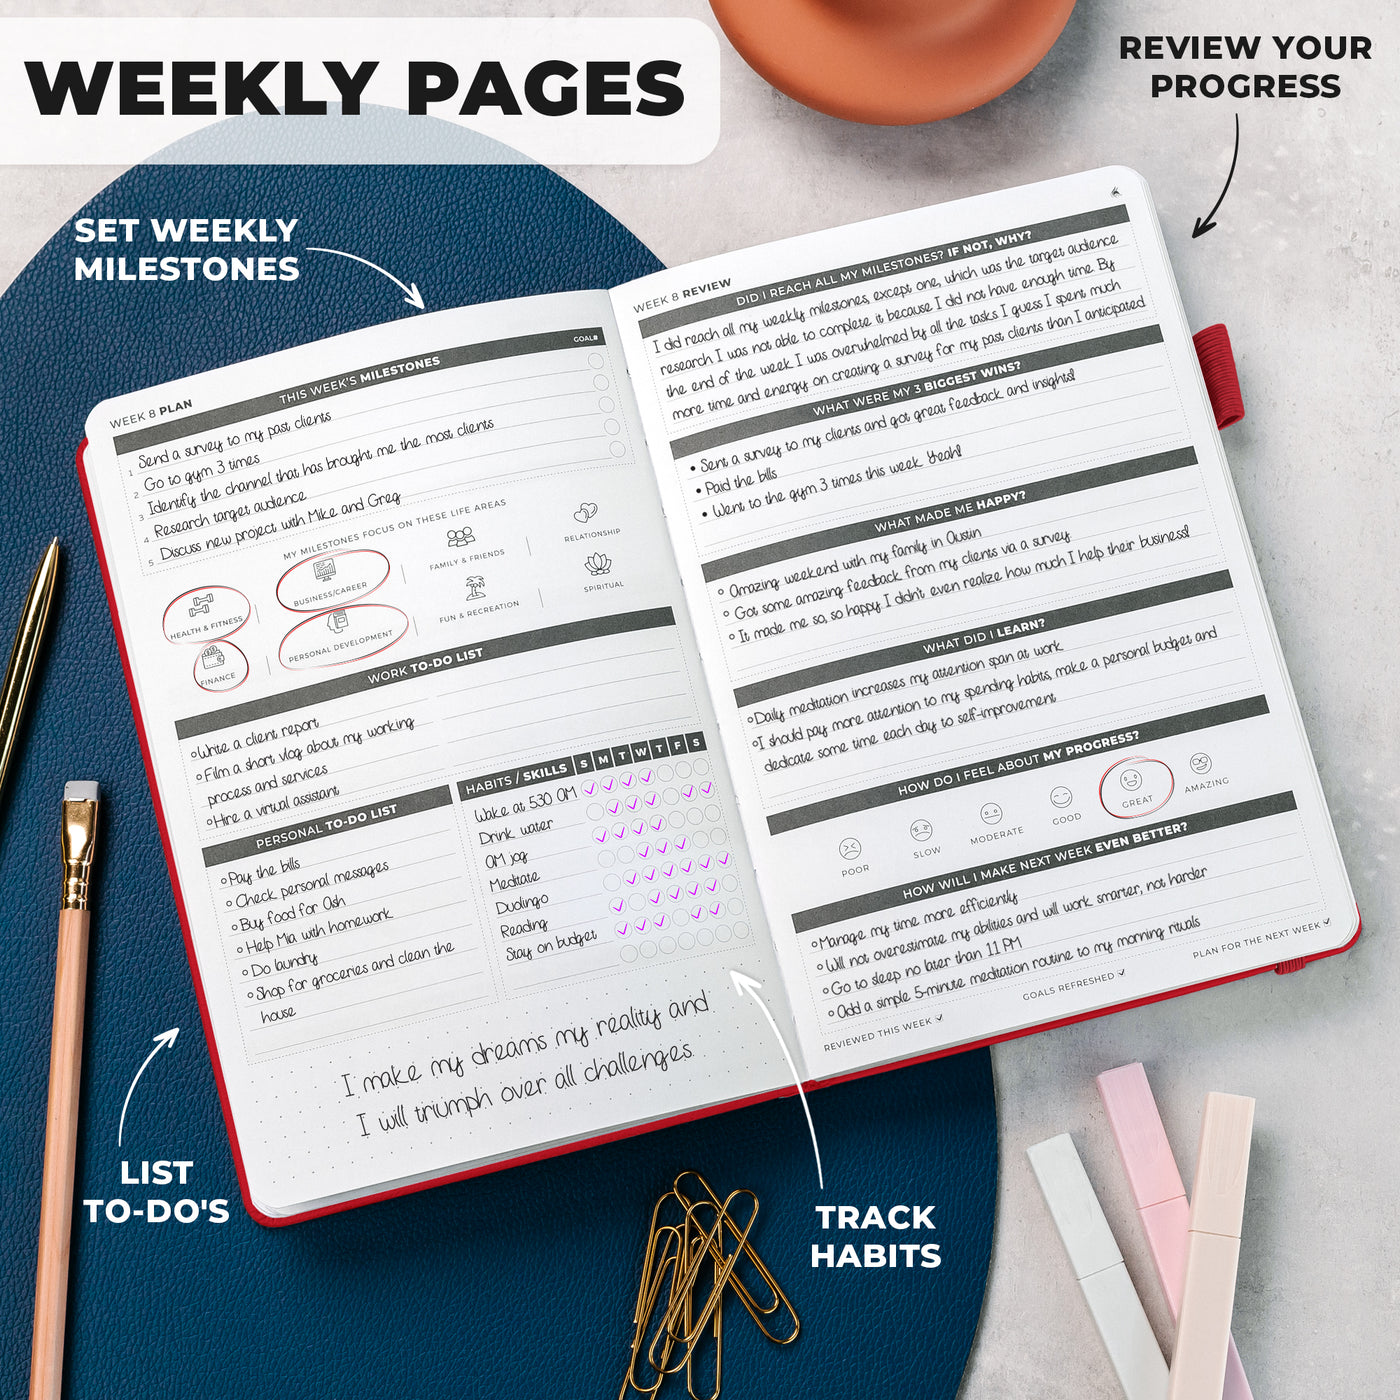 Ultimate Achievers 13-Week Planner - 90 + 1 Days To Change Your Life